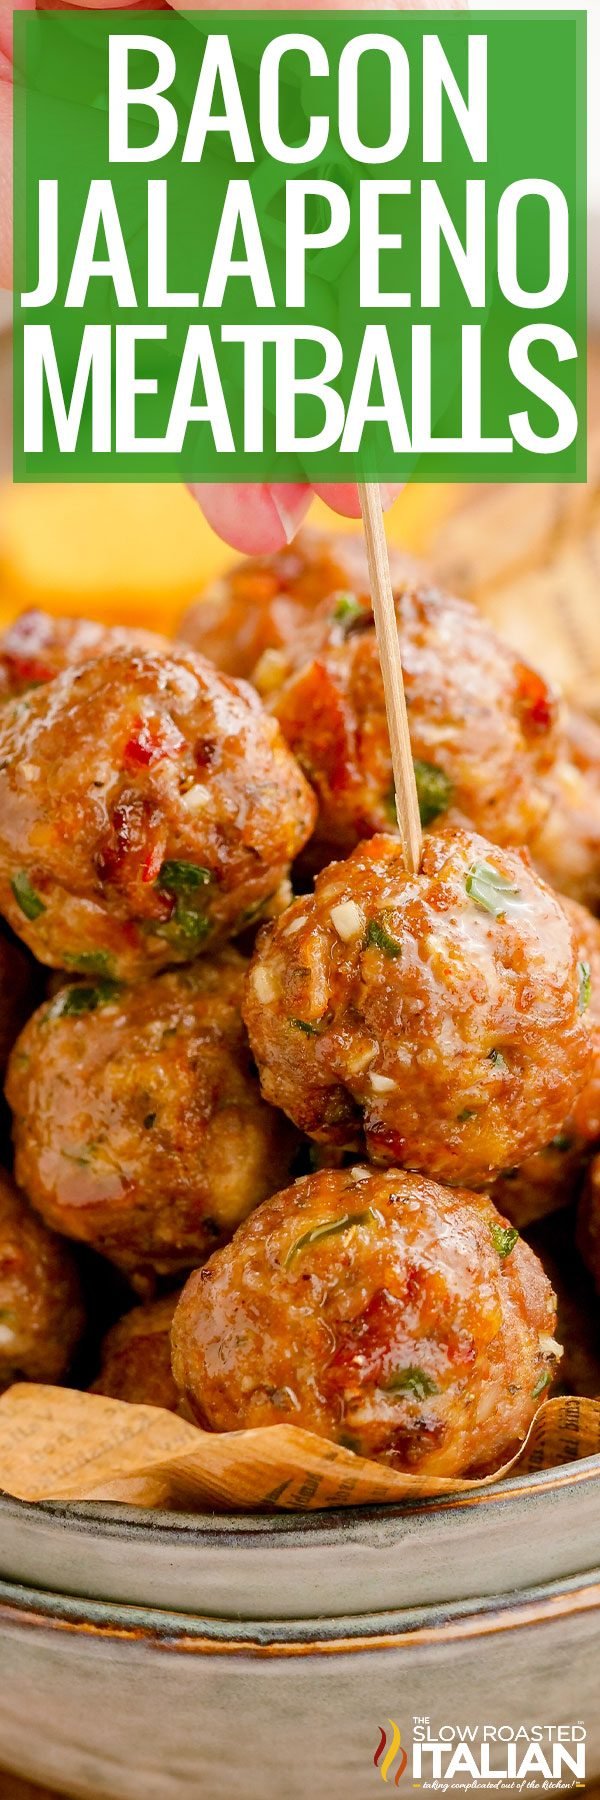 titled image (and shown): bacon jalapeno meatballs